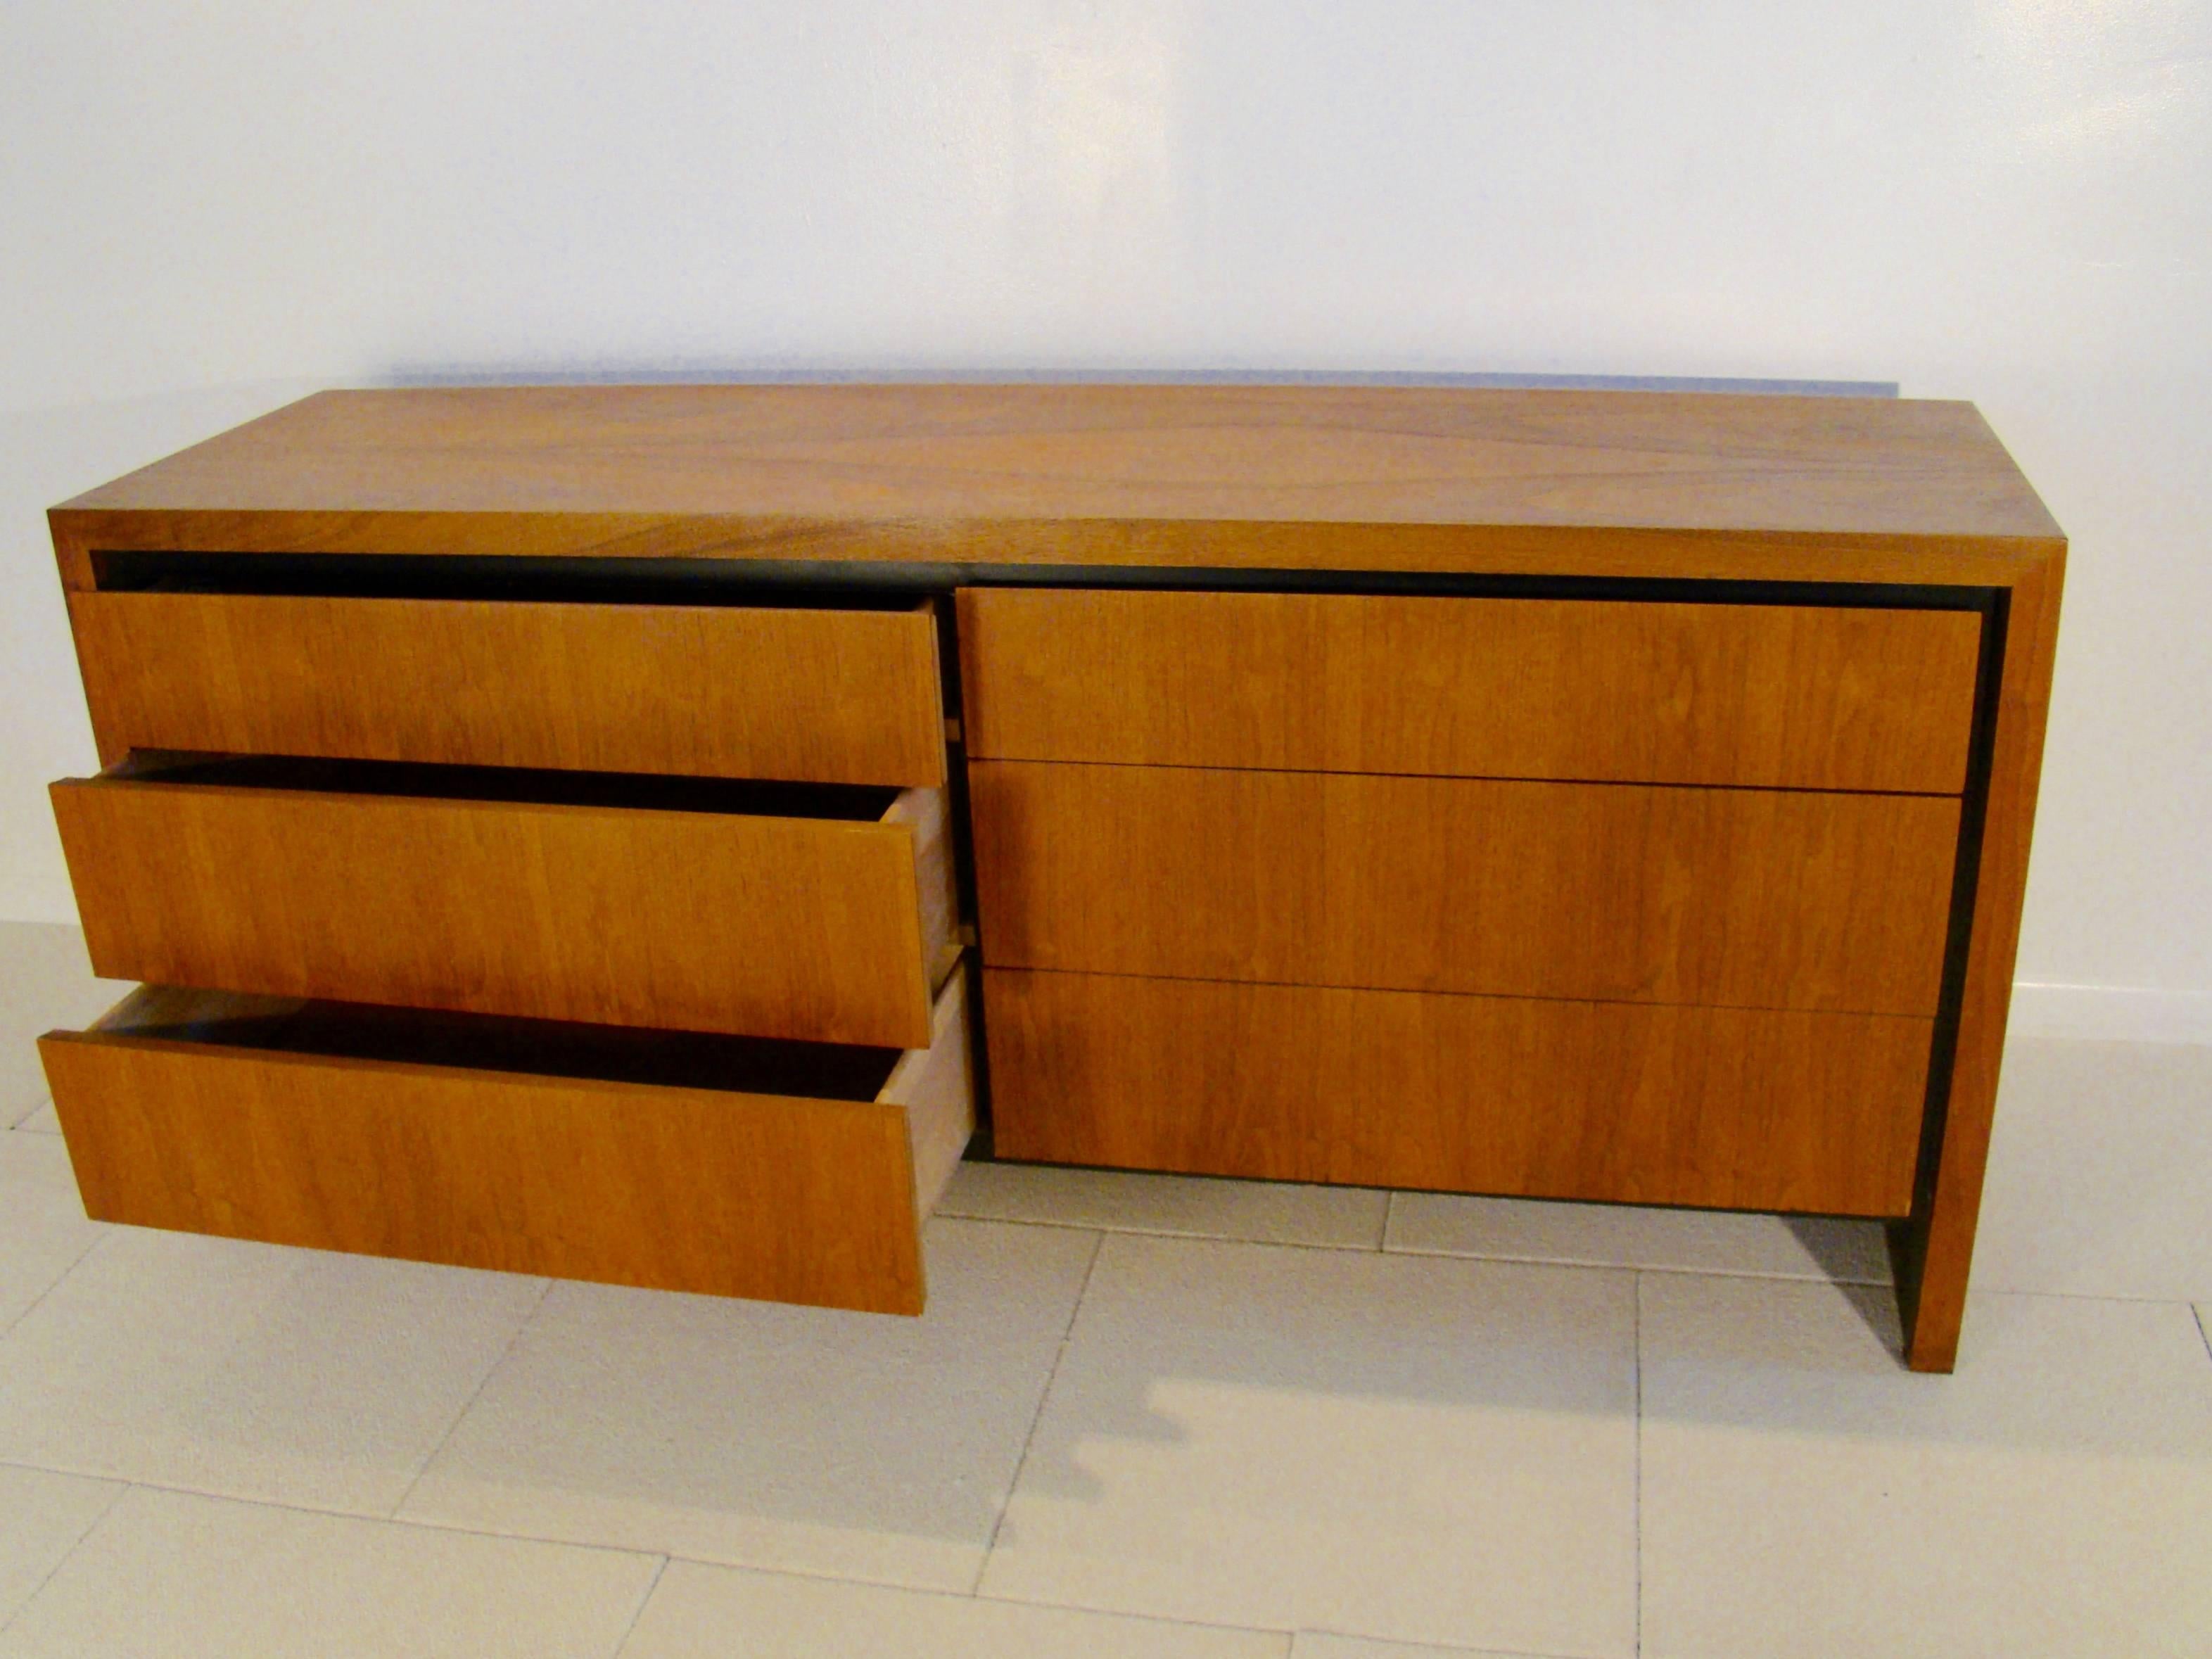 Beautiful walnut and black six-drawer dresser or credenza attributed to Milo Baughman for Dillingham, circa 1970s.